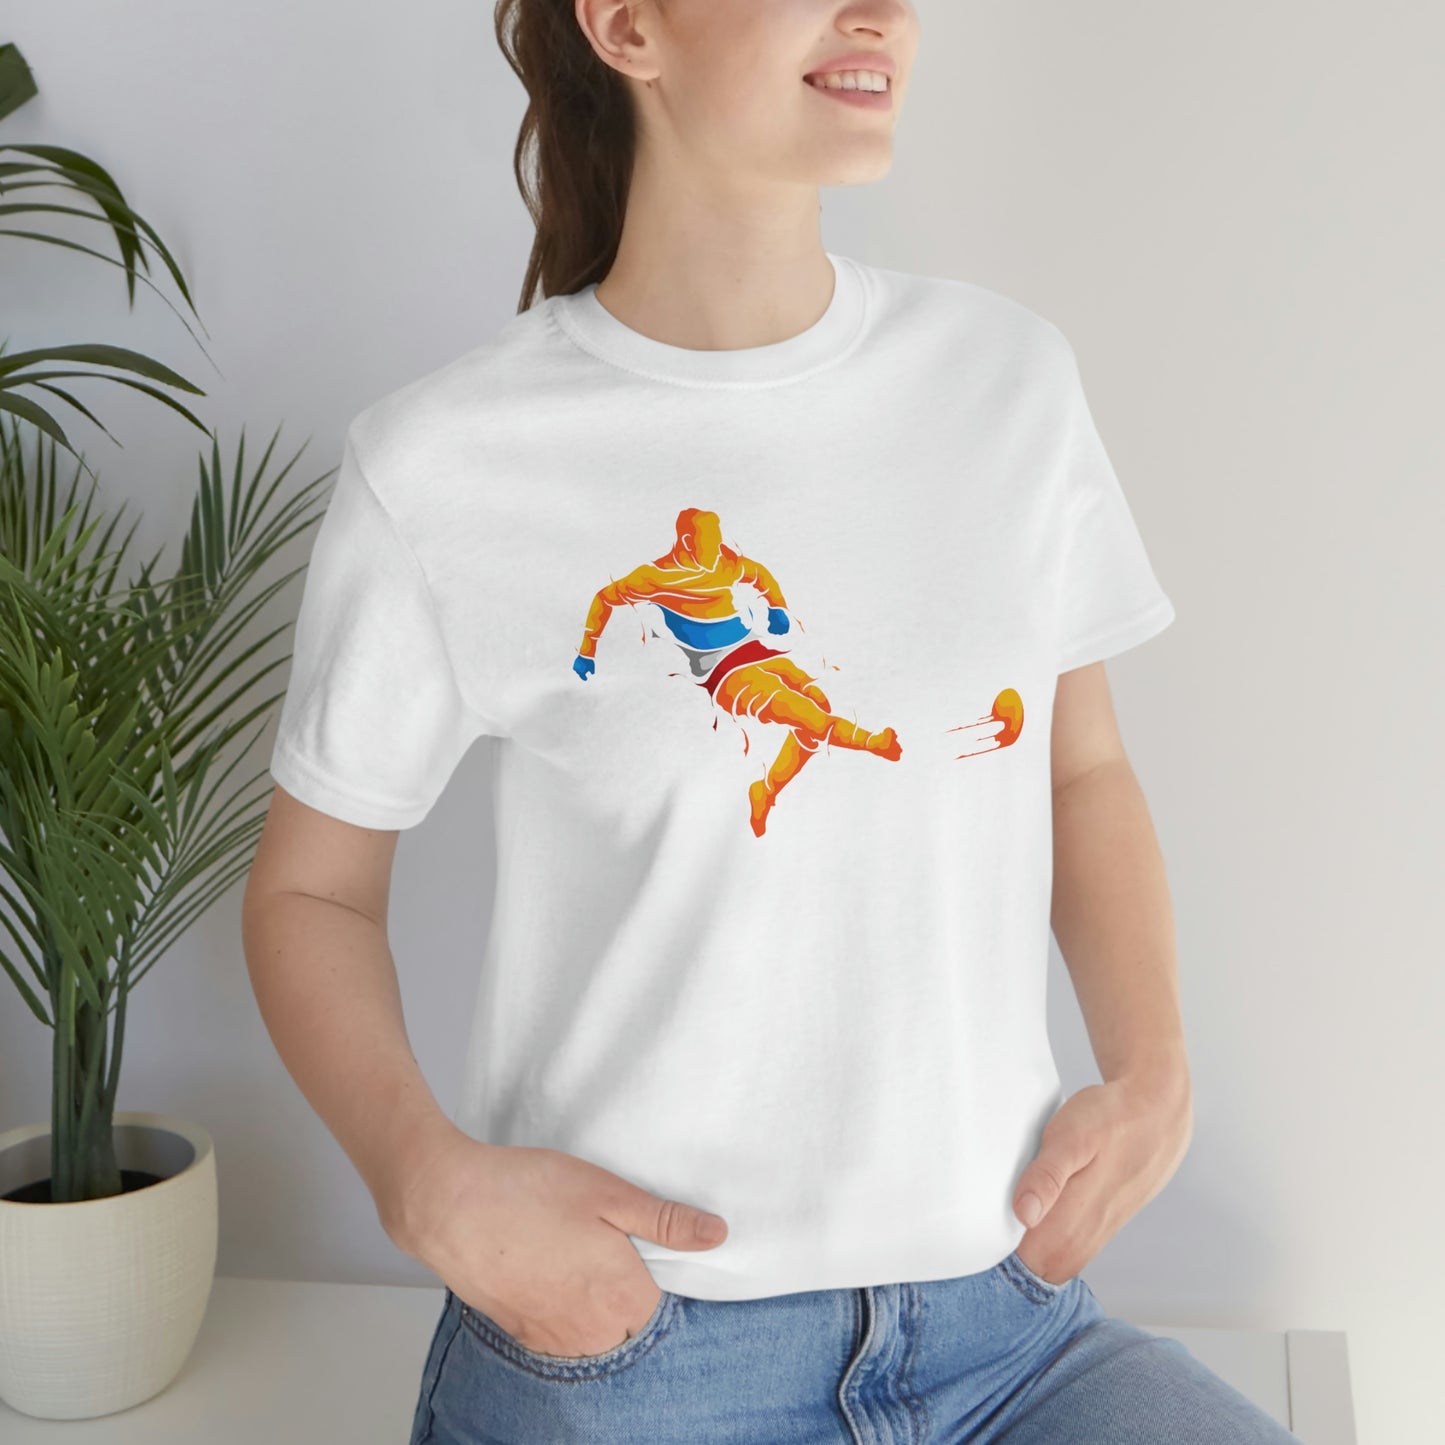 A Unisex Shirt, Gifts for Mom, Birthday Gifts for Him and Her, Cute Mama Shirt, Soccer Mom T-Shirt,Mom Gift,Cute Soccer Shirt unisex Jersey Short Sleeve Tee